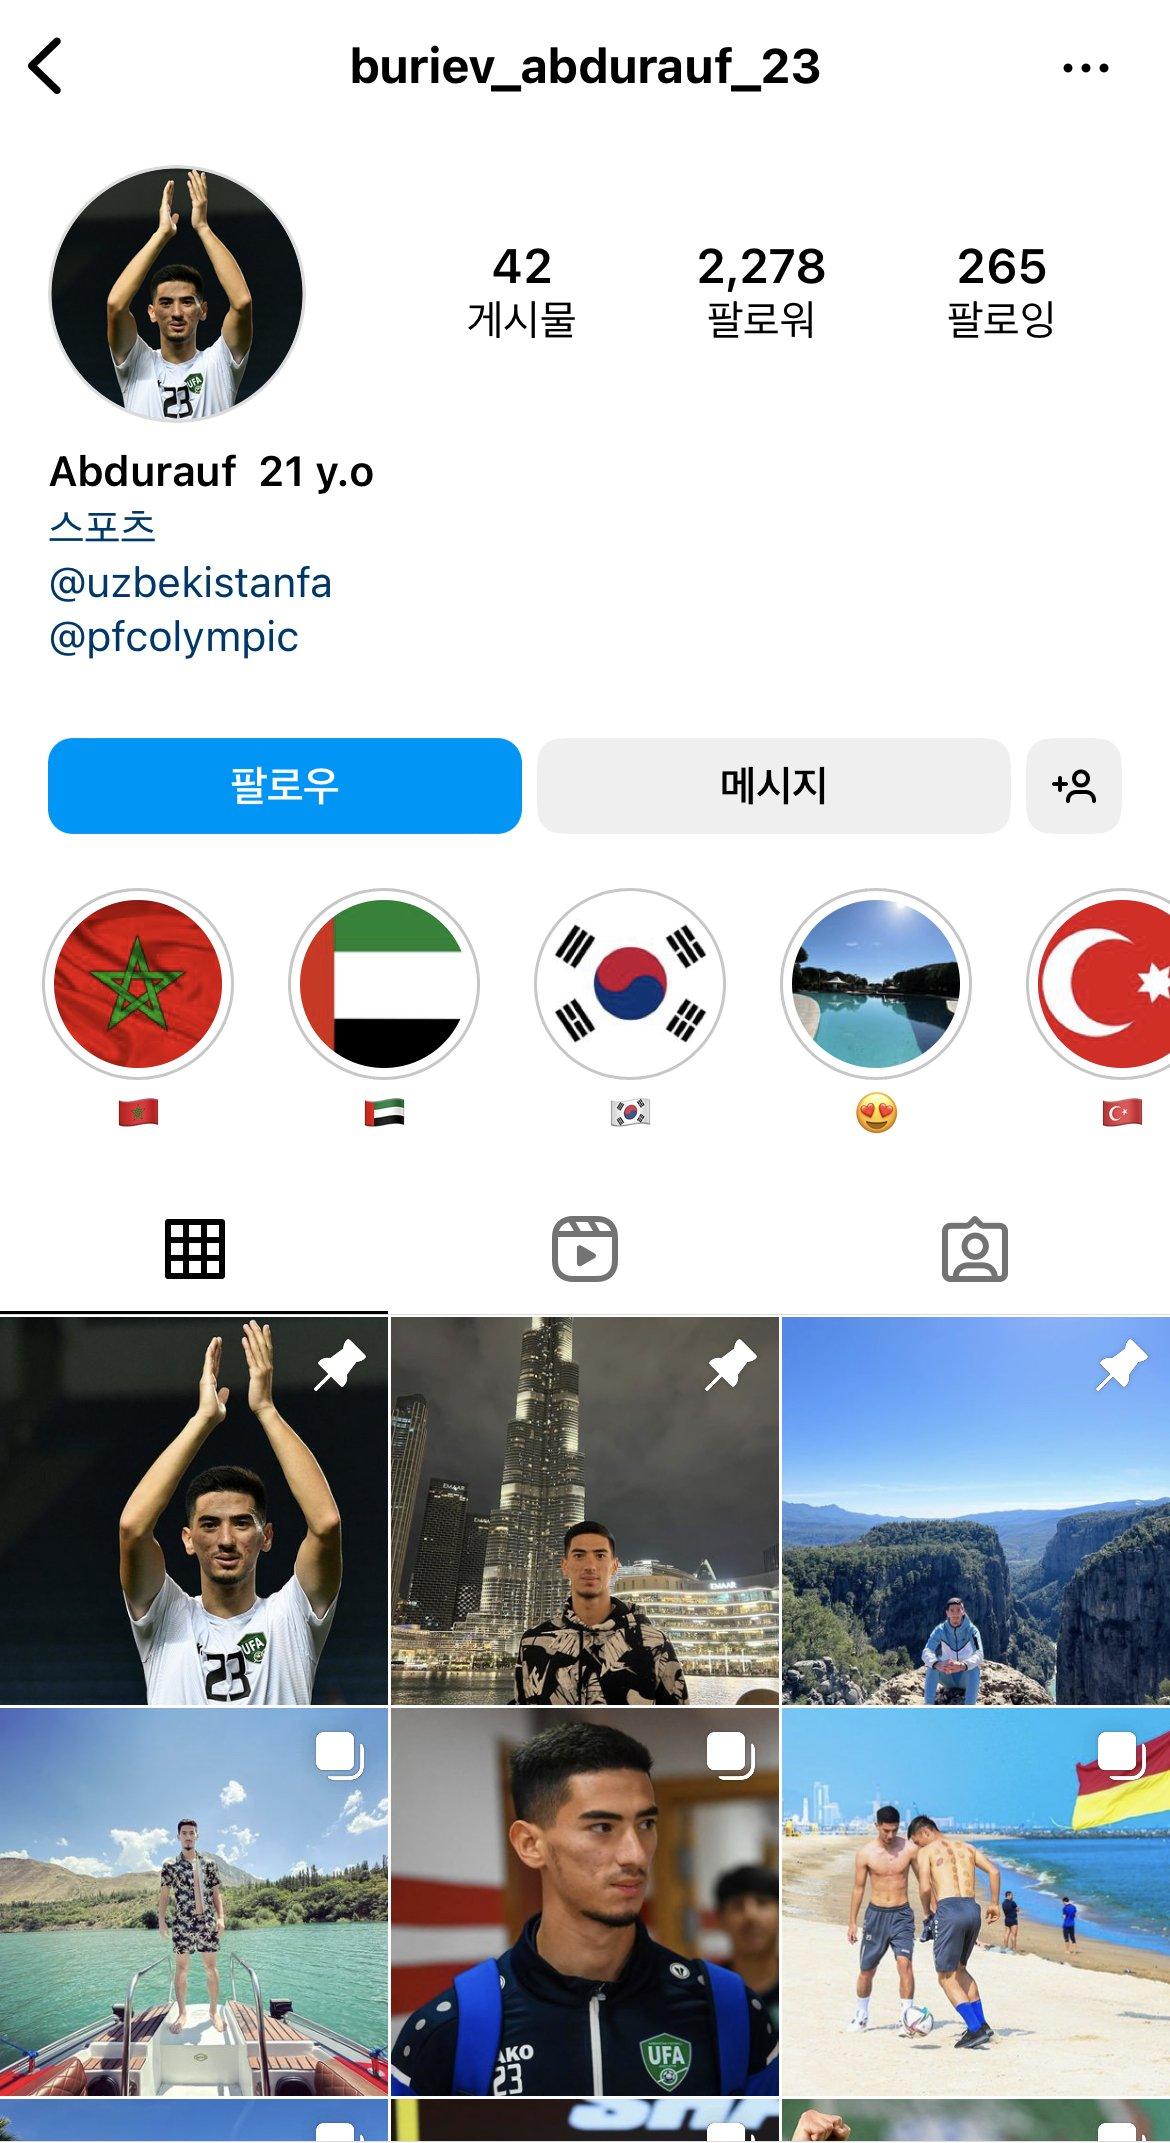 I went to the Uzbekistan player's Instagram where he was sent off